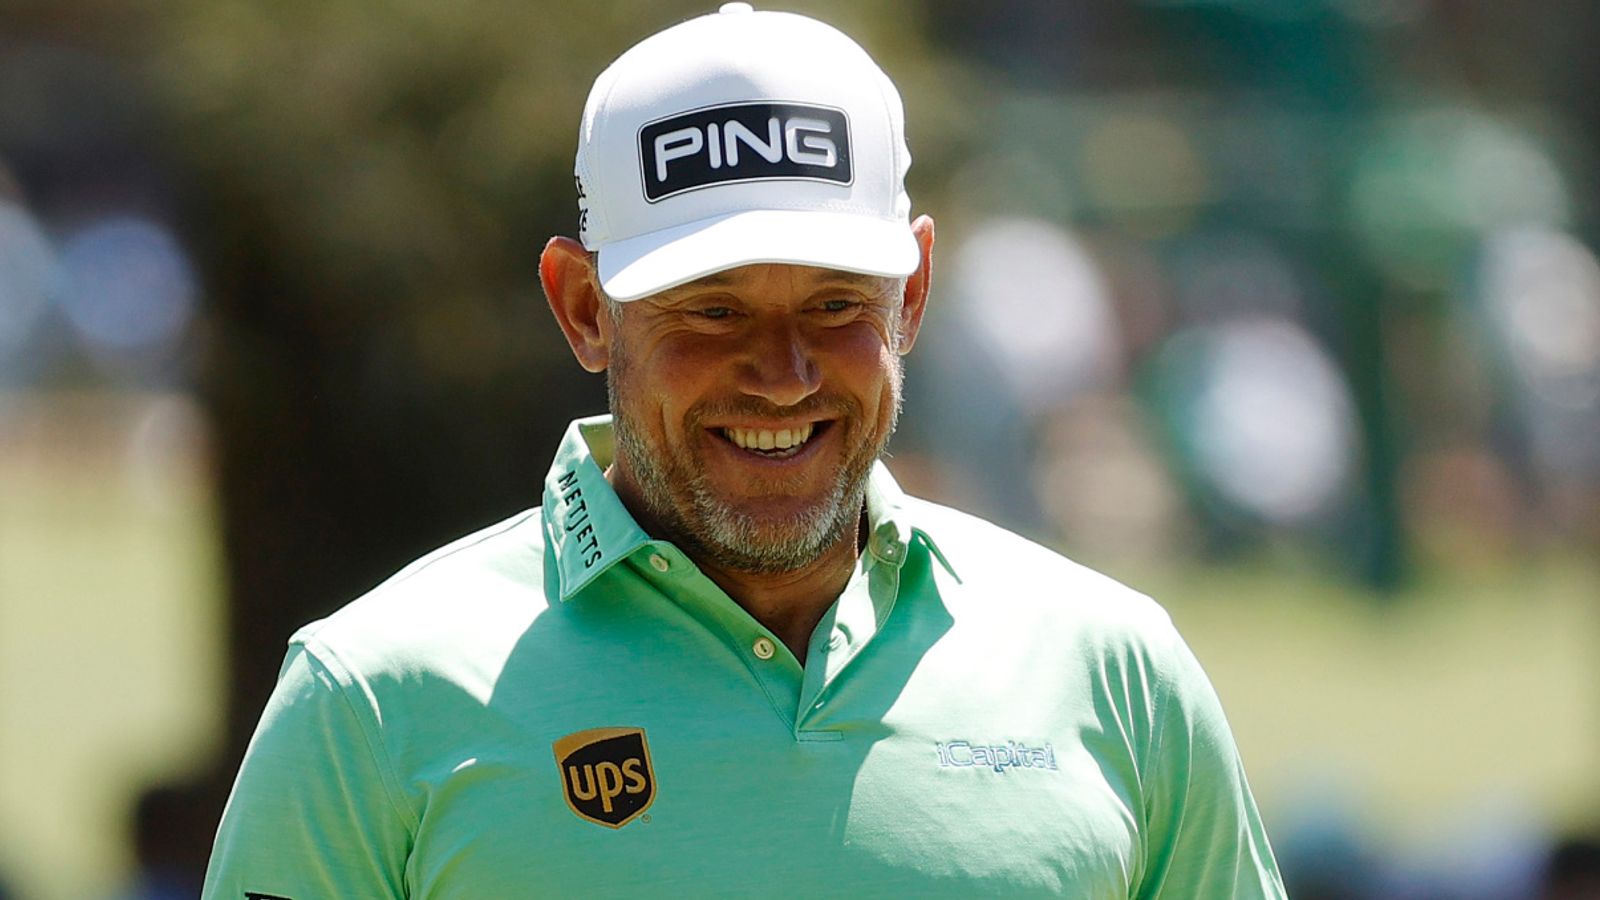 The Masters Lee Westwood hopes to make history and replace Jack